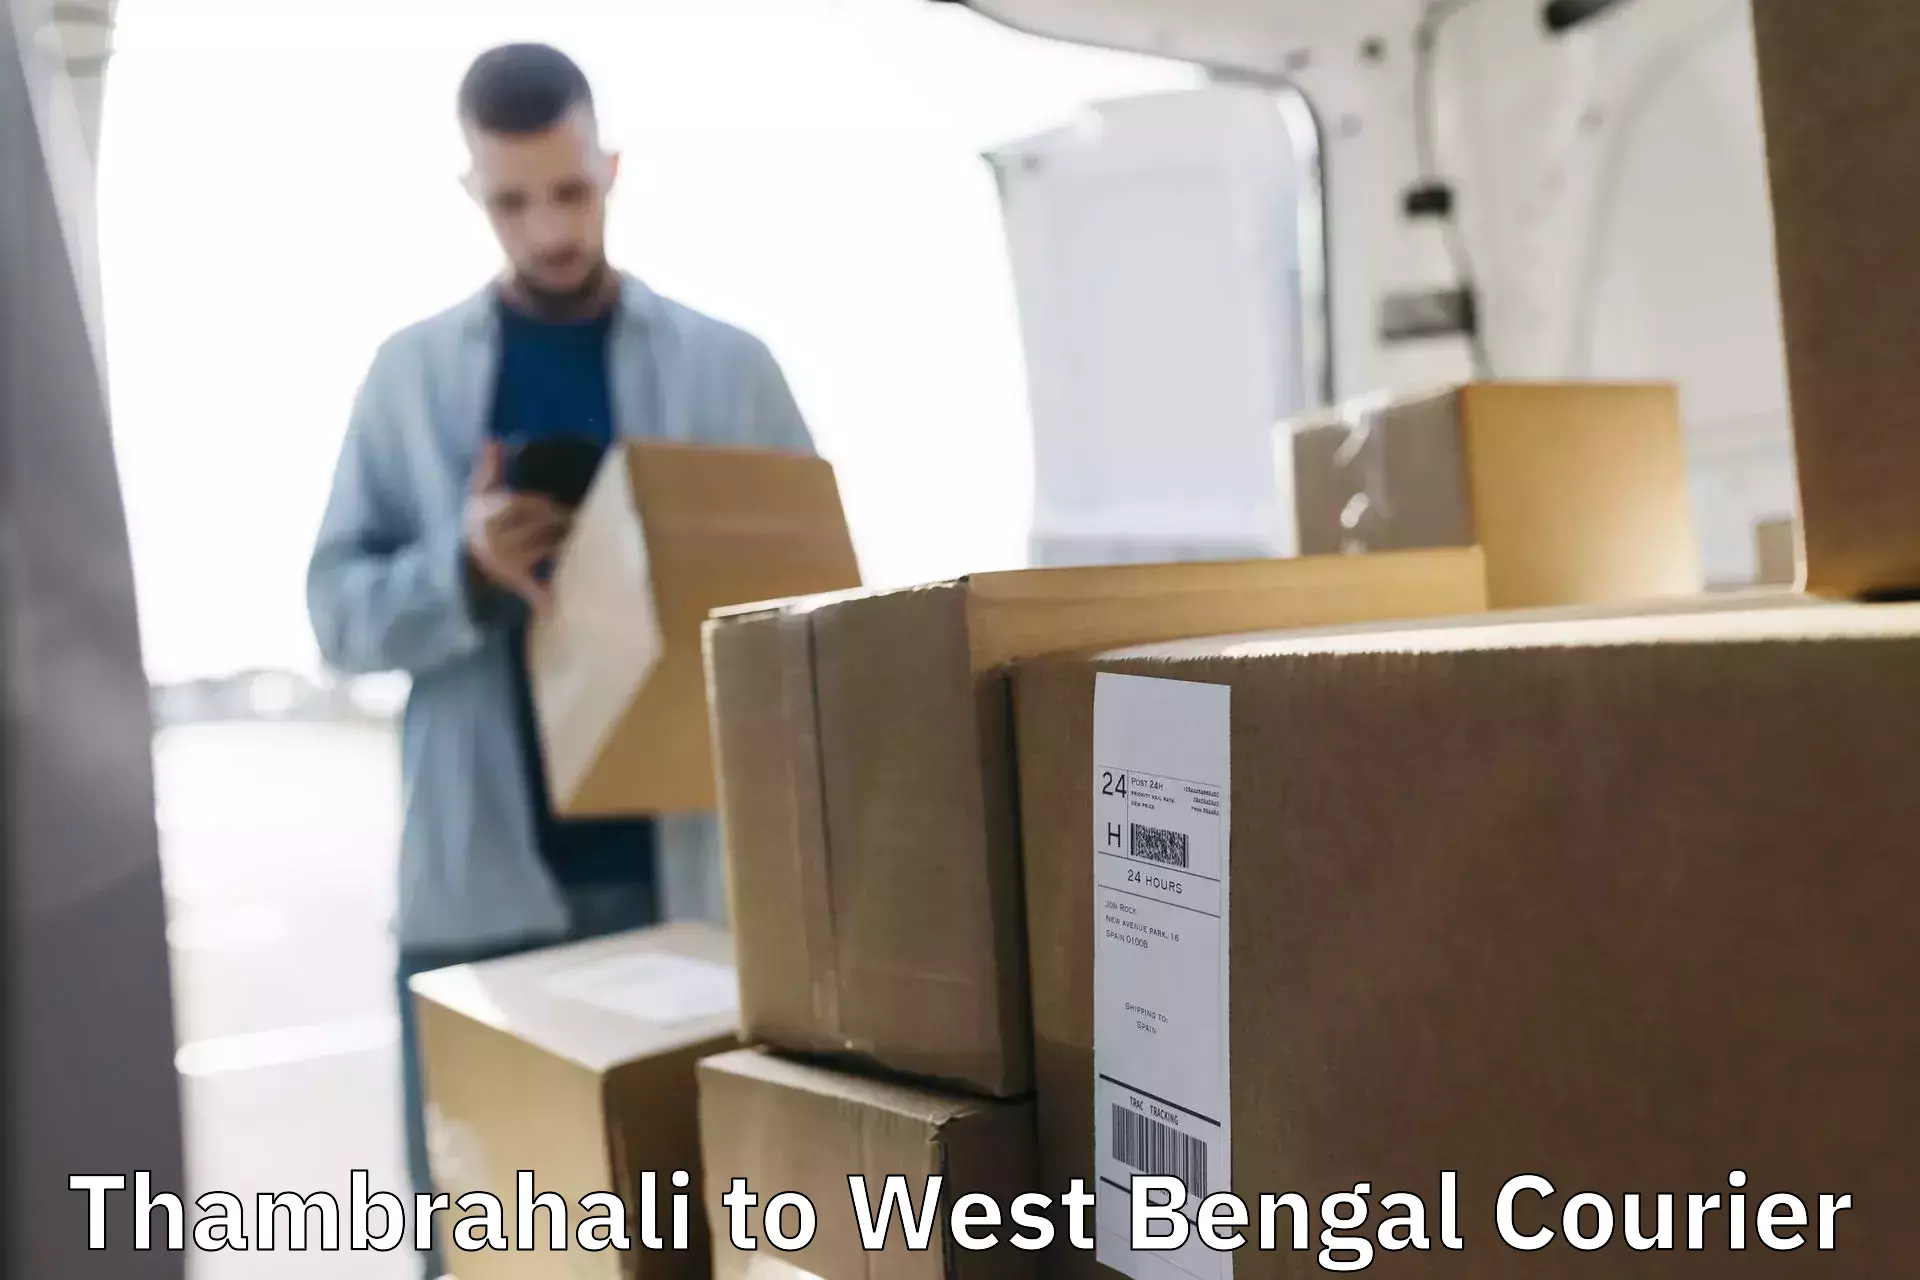 Nationwide parcel services Thambrahali to Gangarampur